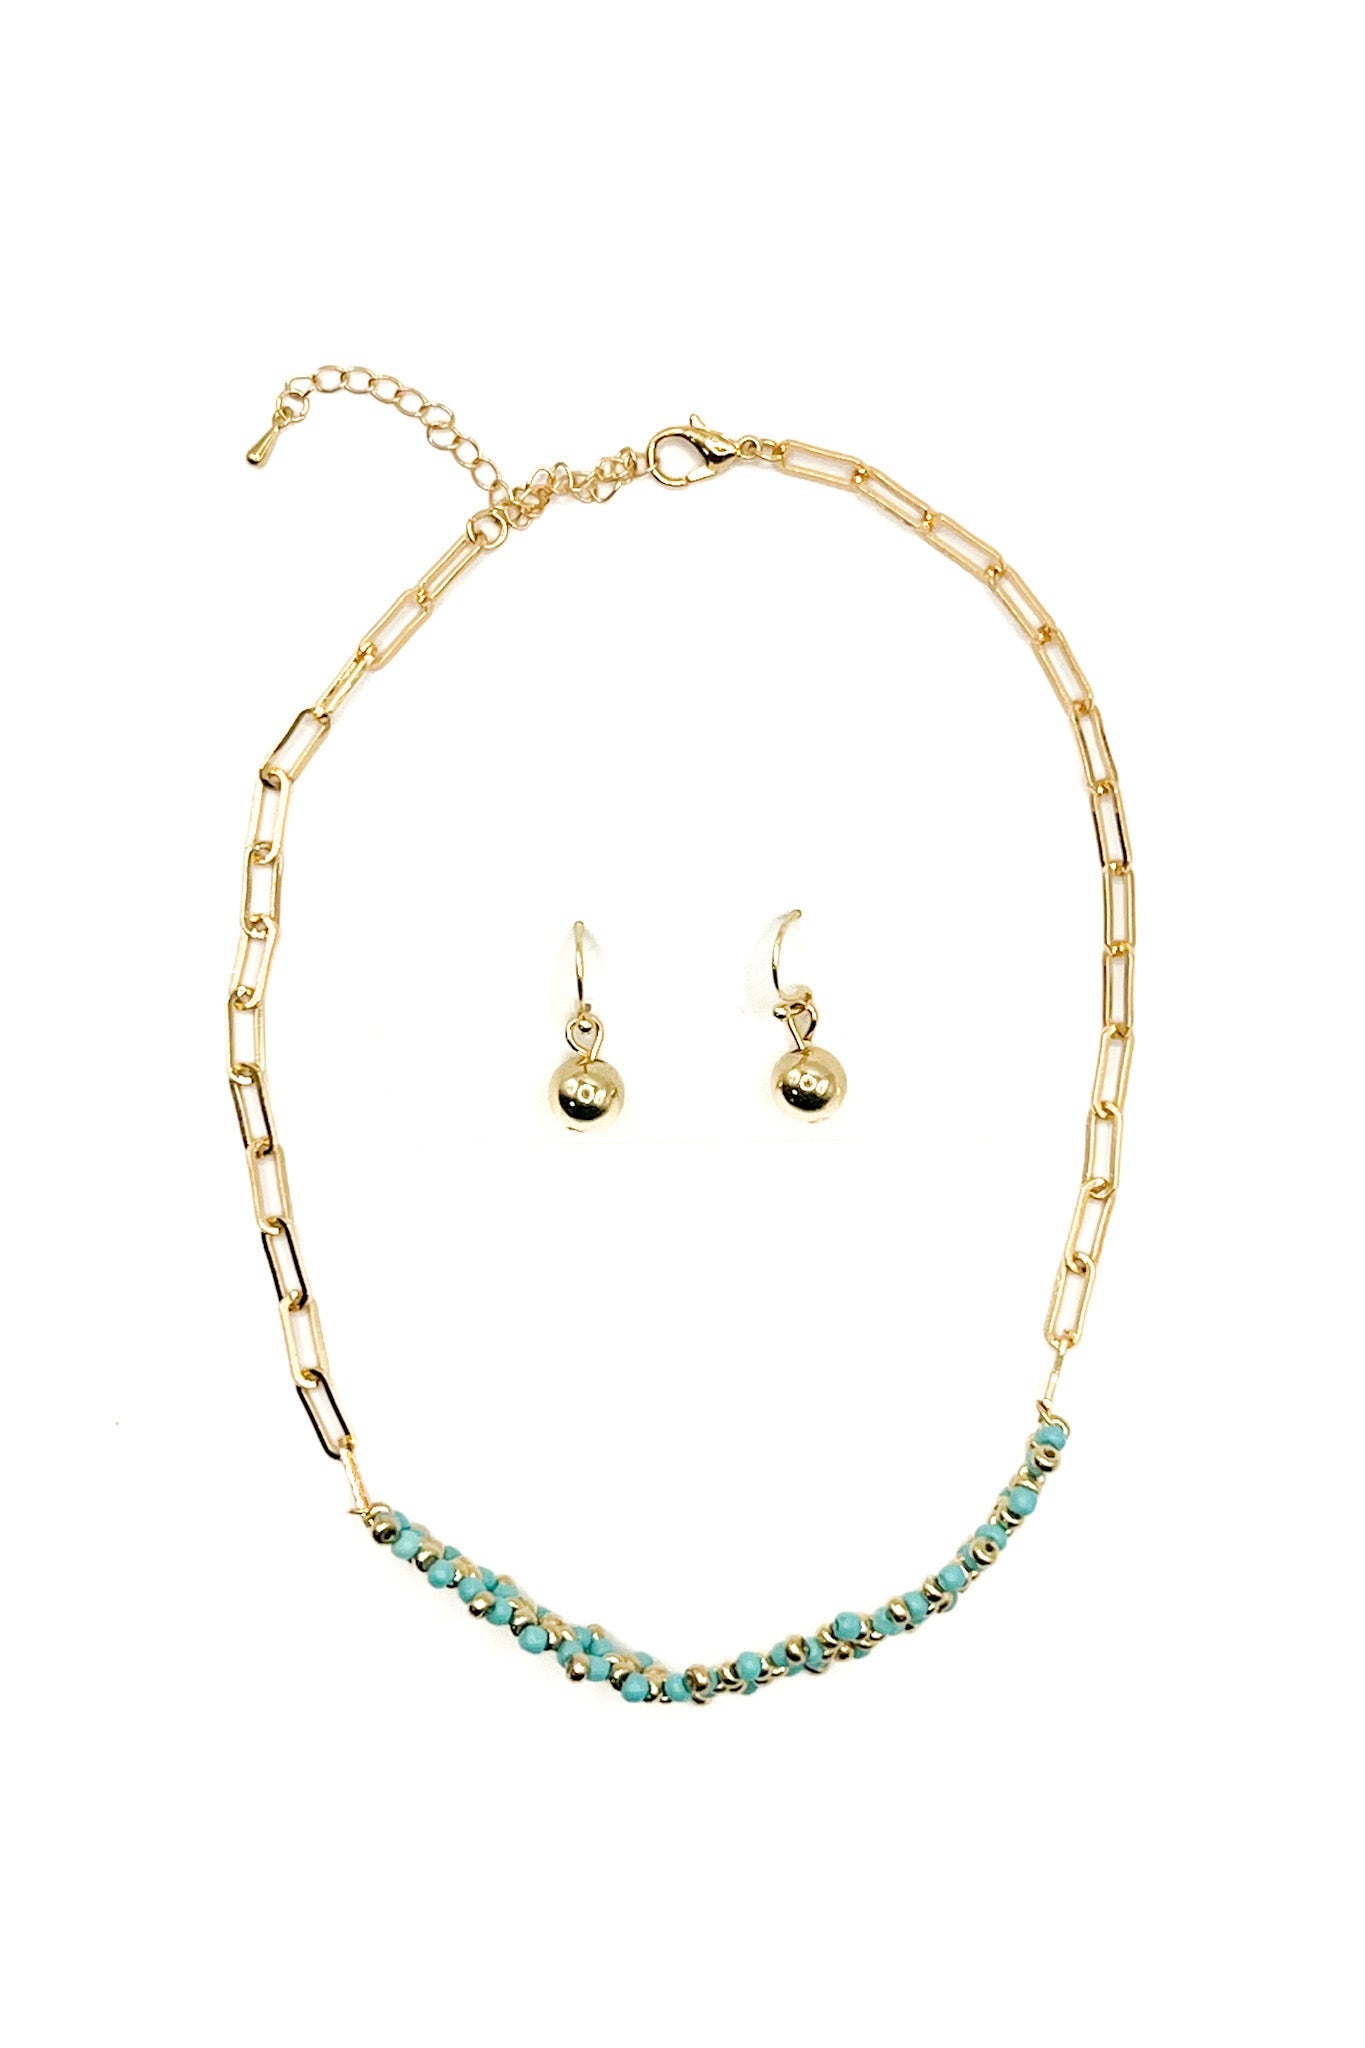 Ornate Turquoise & Gold Chain Necklace Set